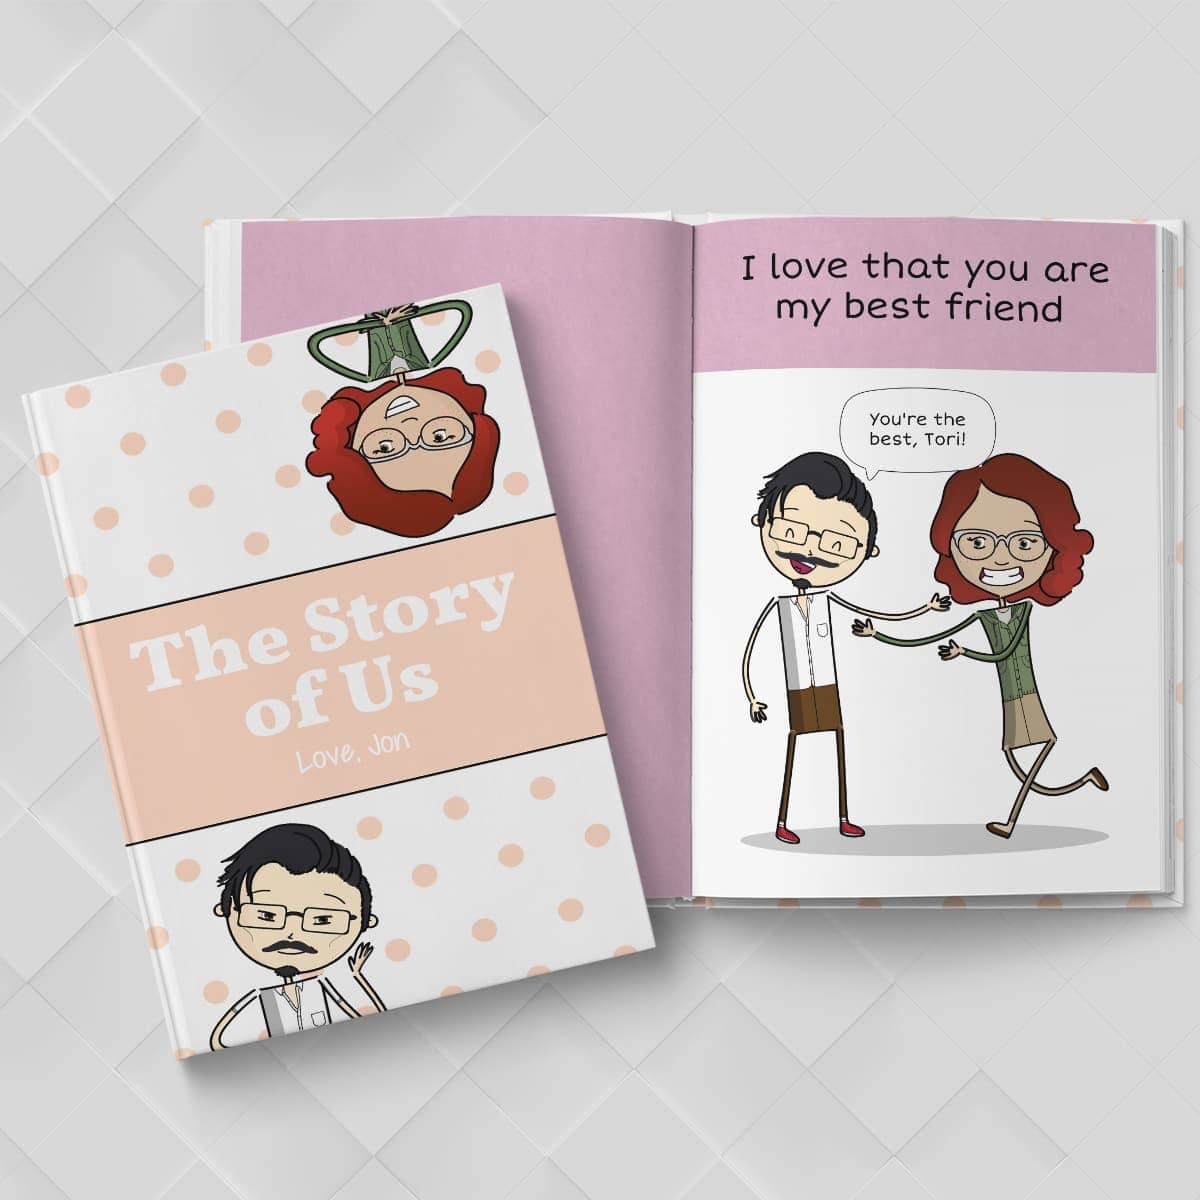 Tell Your Story Gifts by LoveBook | The Personalized Gift Book That Says Why You Love Someone | LoveBook Online - 0